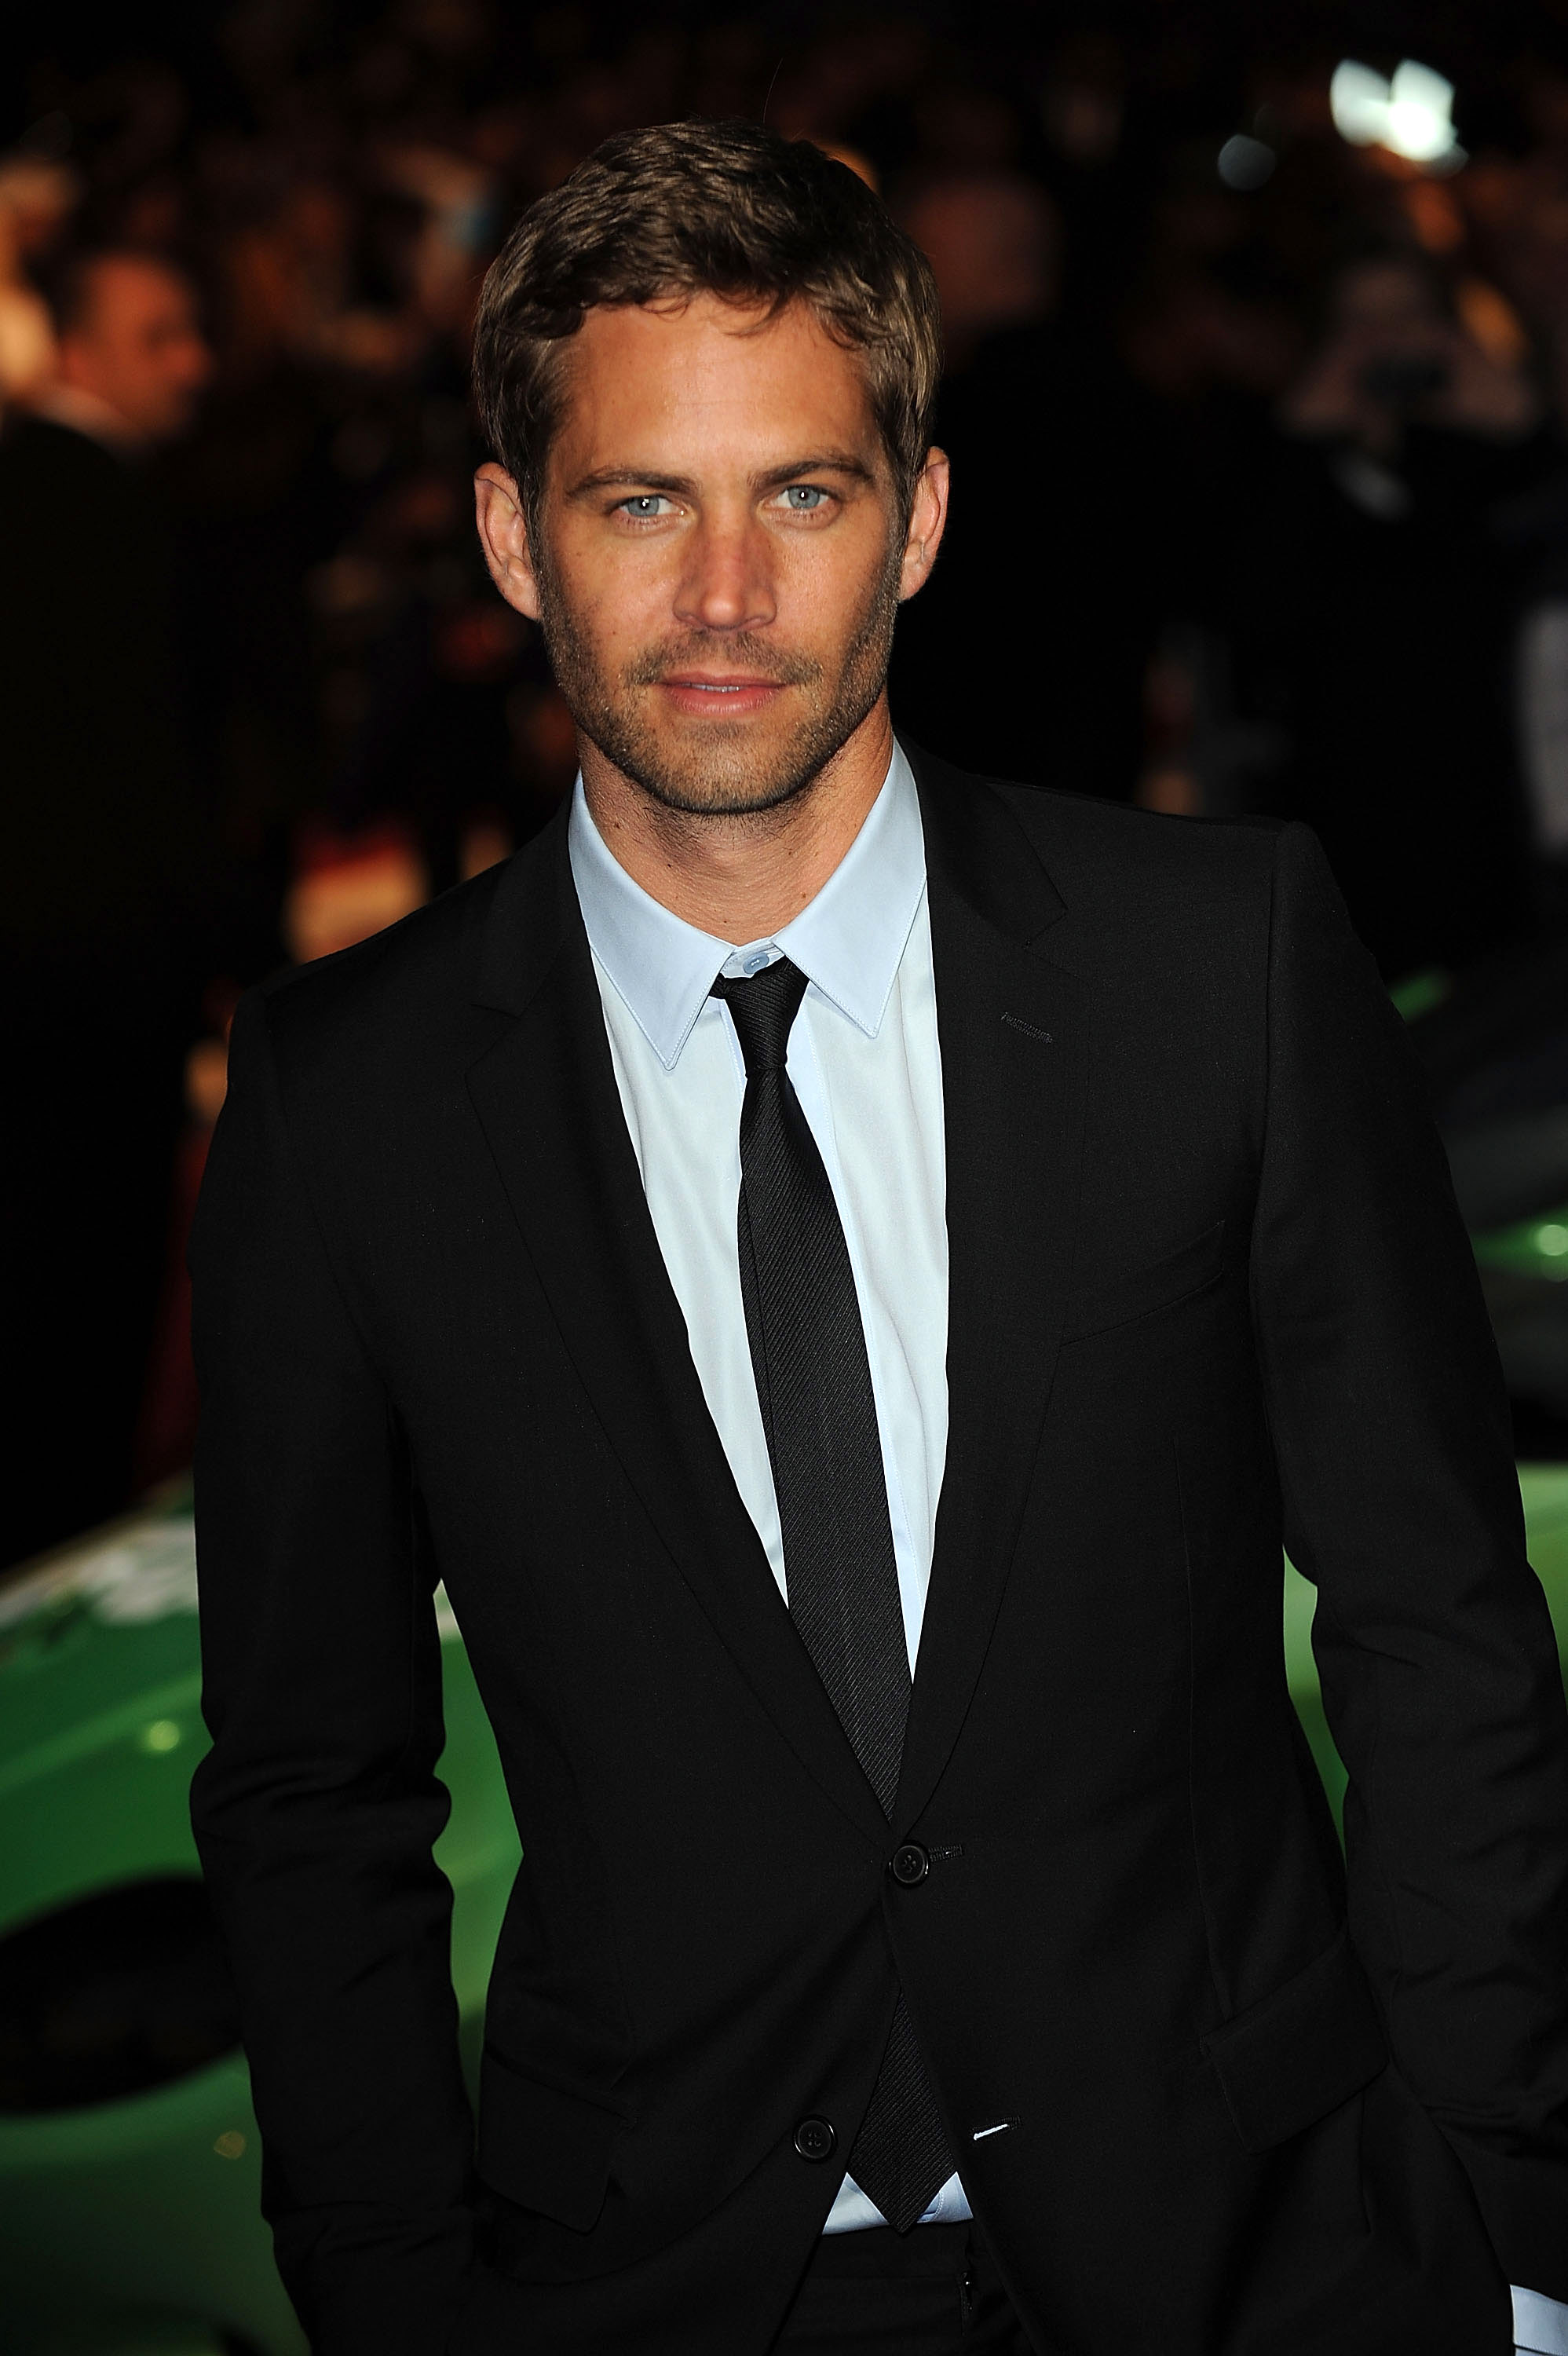 Paul Walker attends the UK premiere of Fast & Furious 4 at Vue West End on March 19, 2009 in London | Source: Getty Images